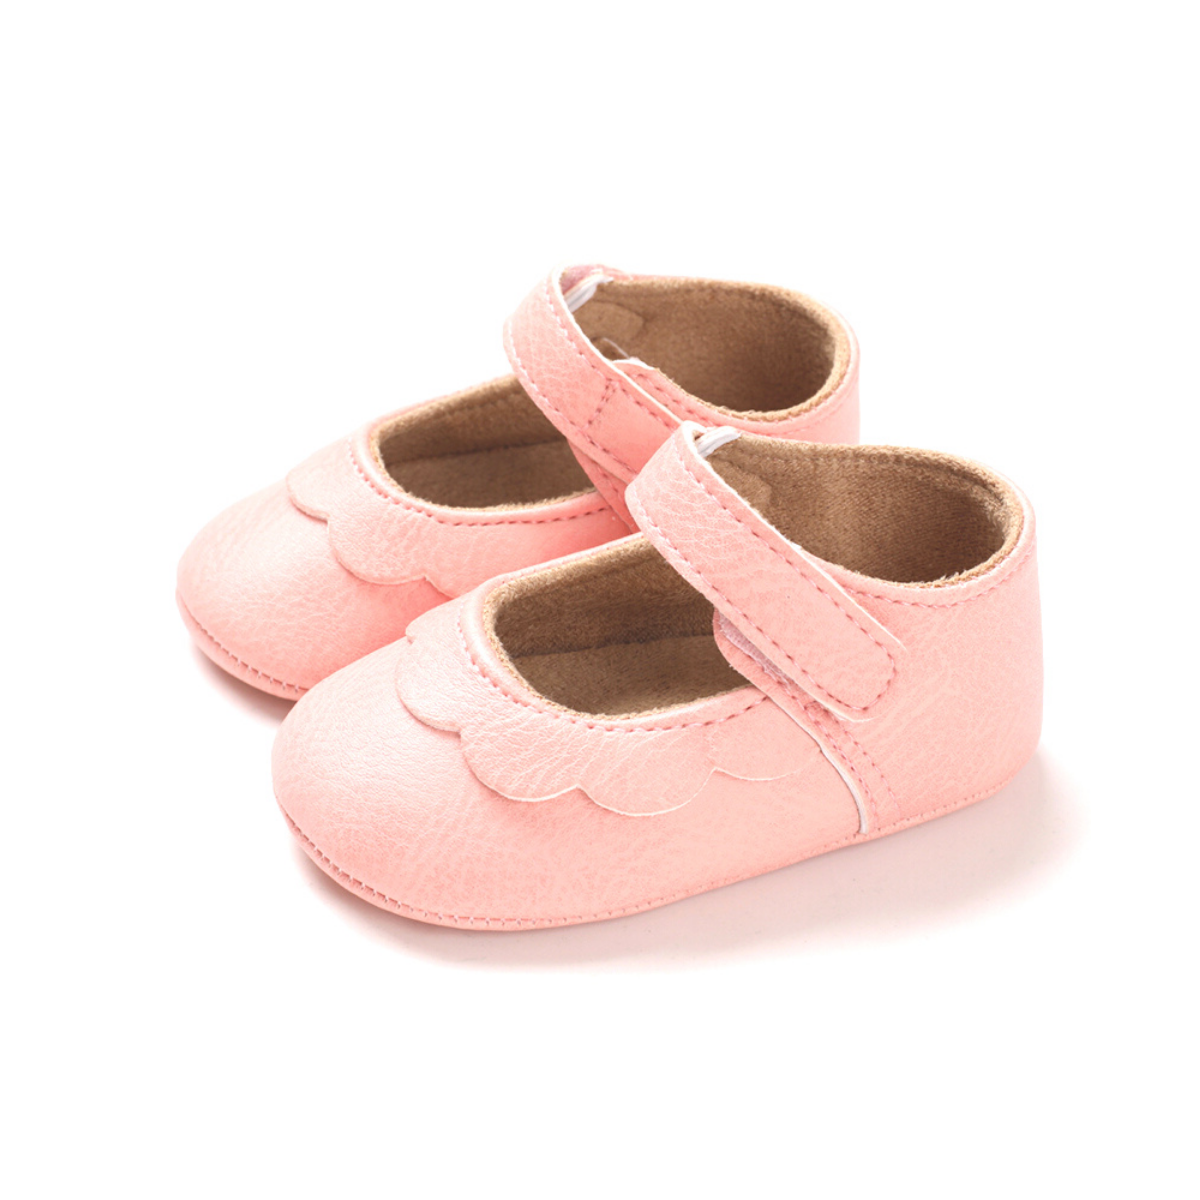 Ollie Soft Sole Shoes - Pink